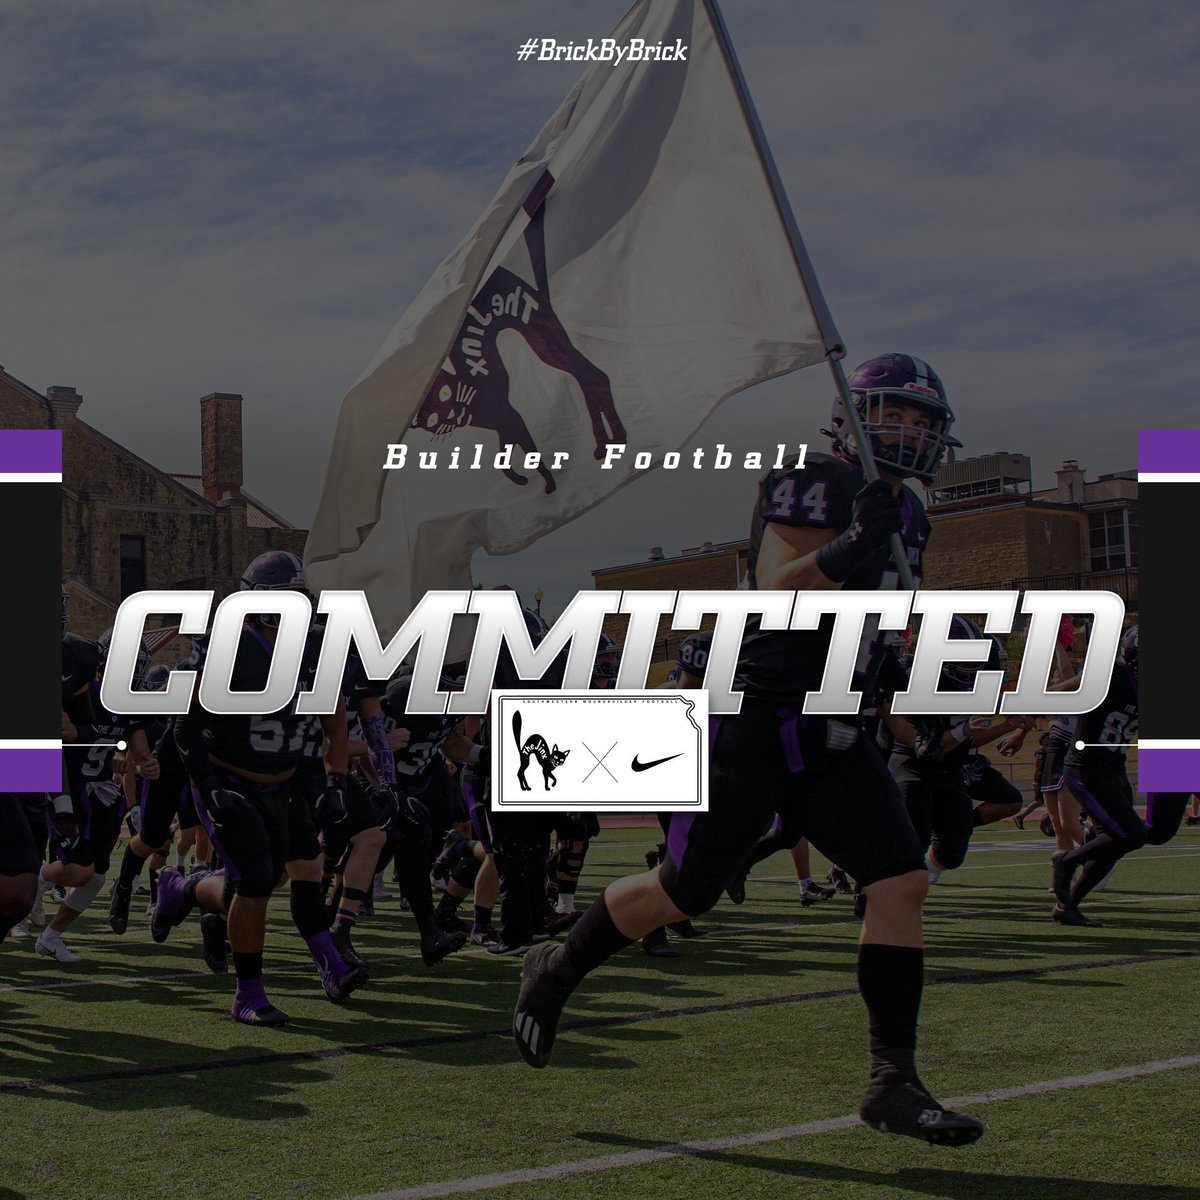 Happy to say that I will be continuing my academics and football career at southwestern university!!!! @CoachStrongSC @CoachVRedd @CoachA07 @BuilderFootball